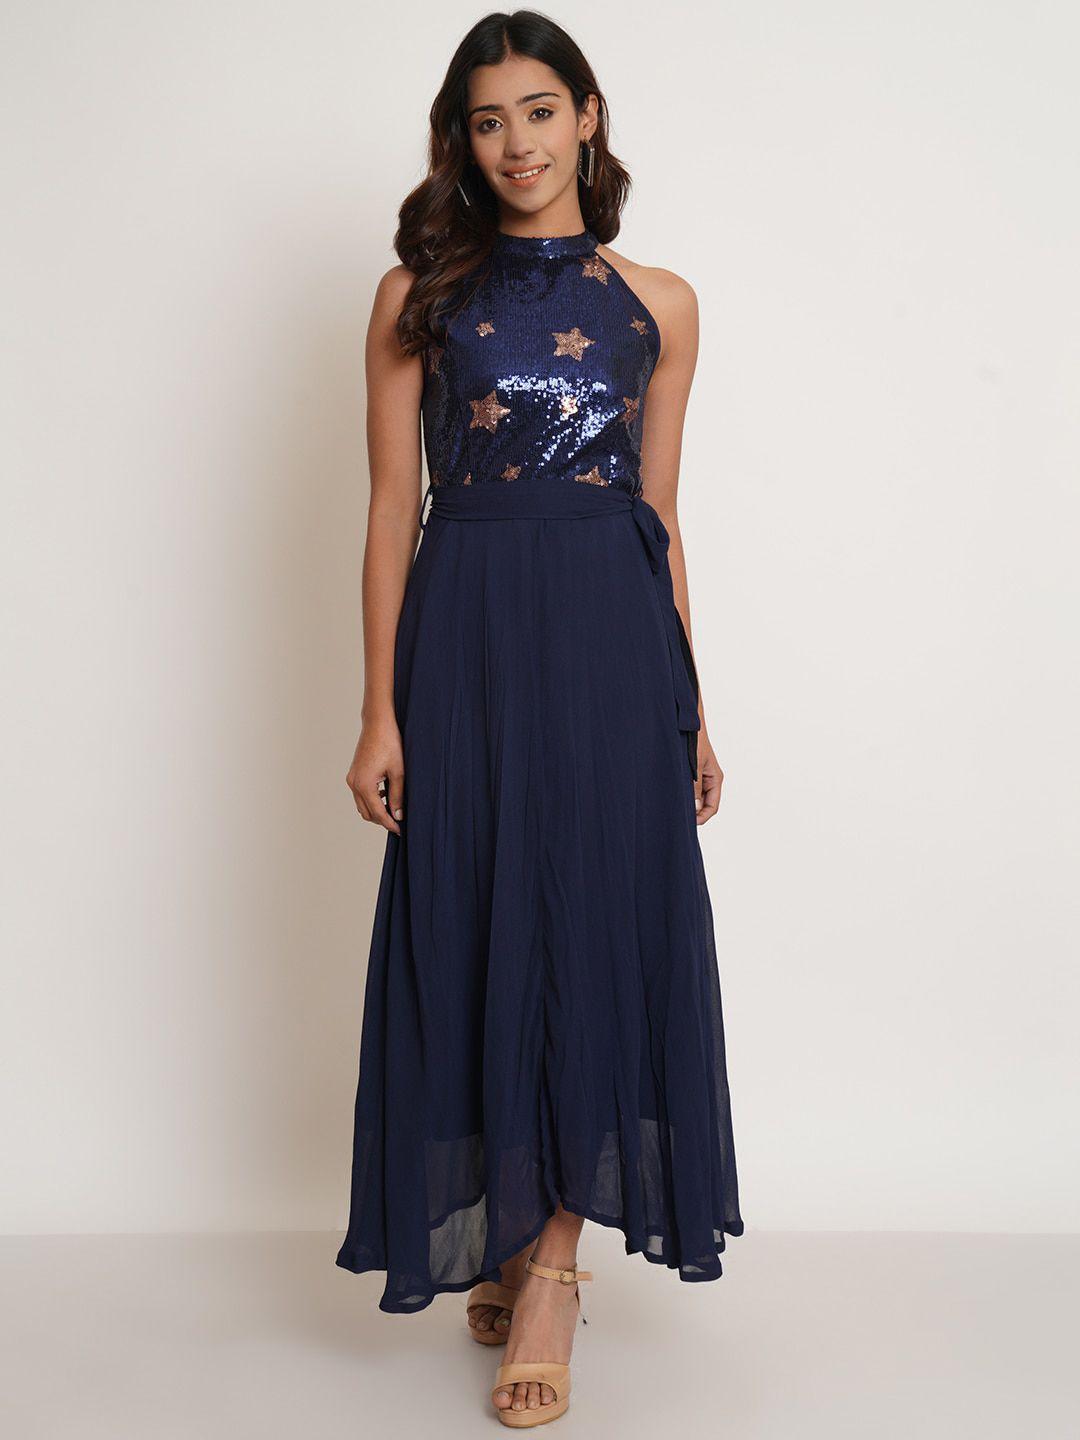 westclo embellished sequined fit & flare maxi dress with belt